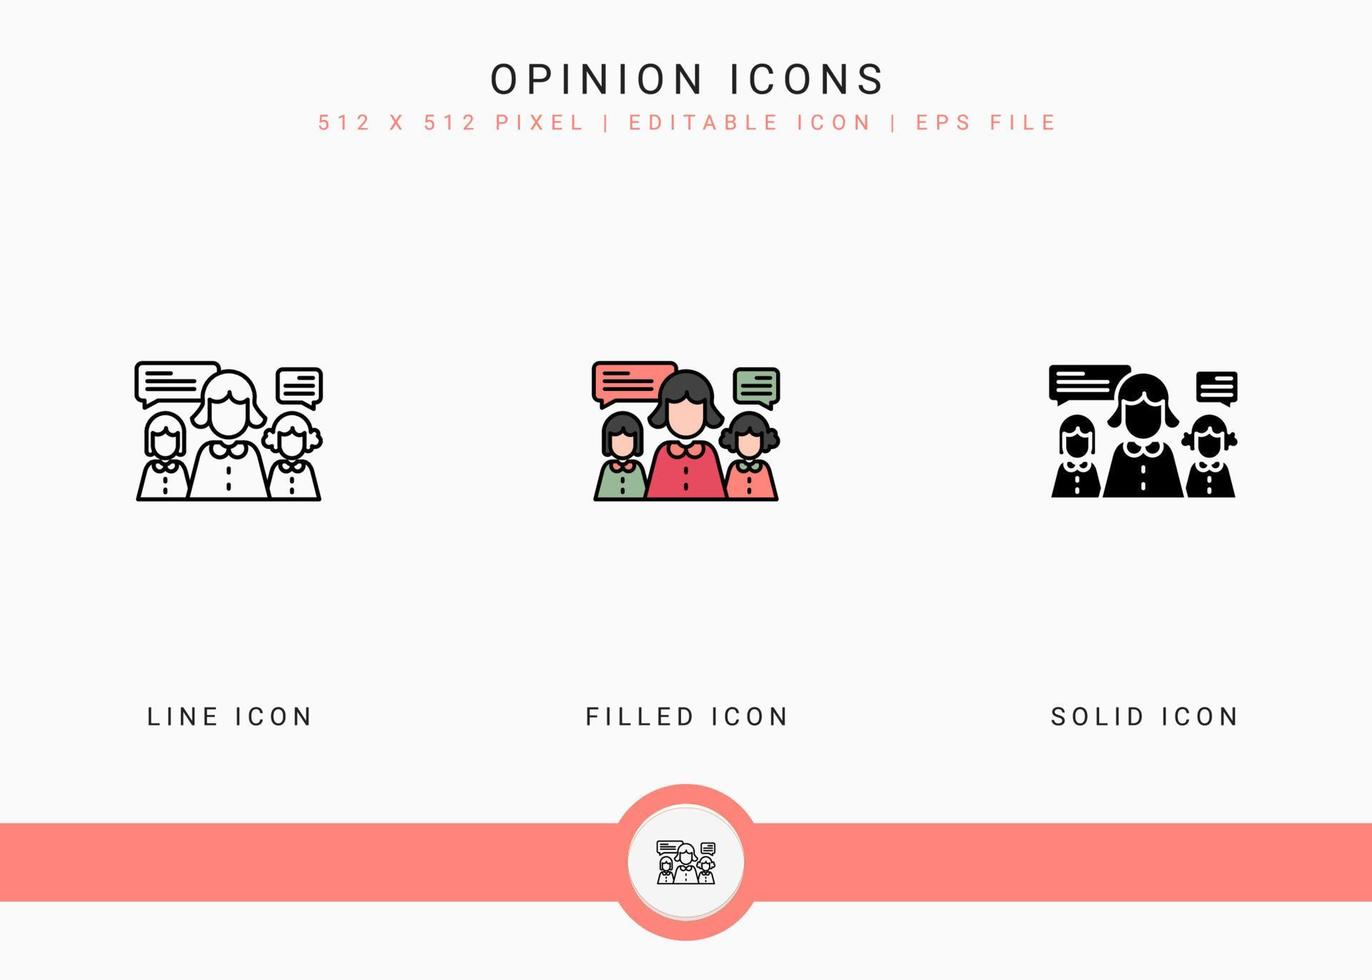 Opinion icons set vector illustration with solid icon line style. Customer satisfaction check concept. Editable stroke icon on isolated background for web design, infographic and UI mobile app.